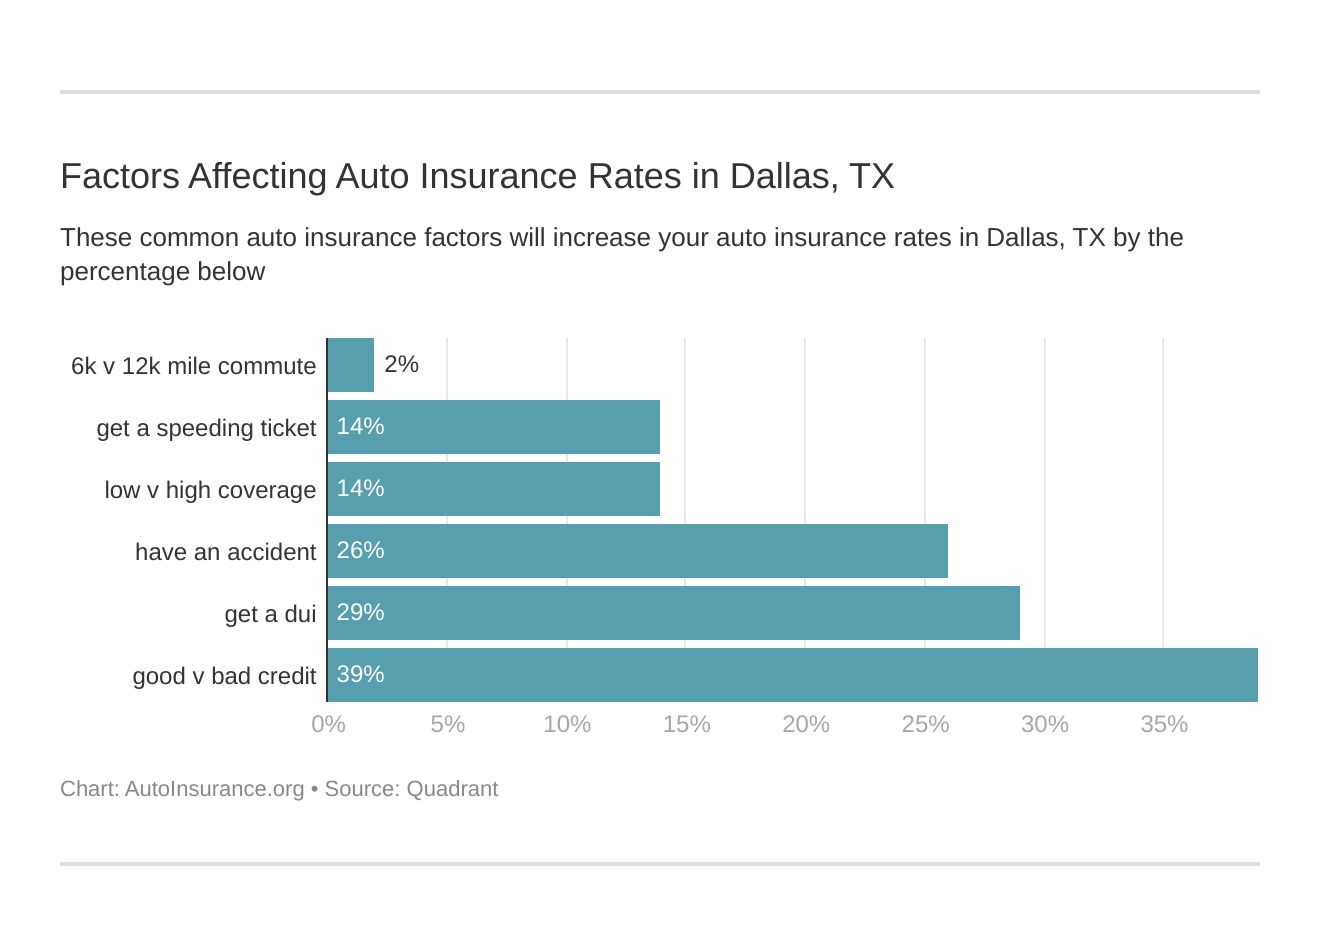 Factors Affecting Auto Insurance Rates in Dallas, TX